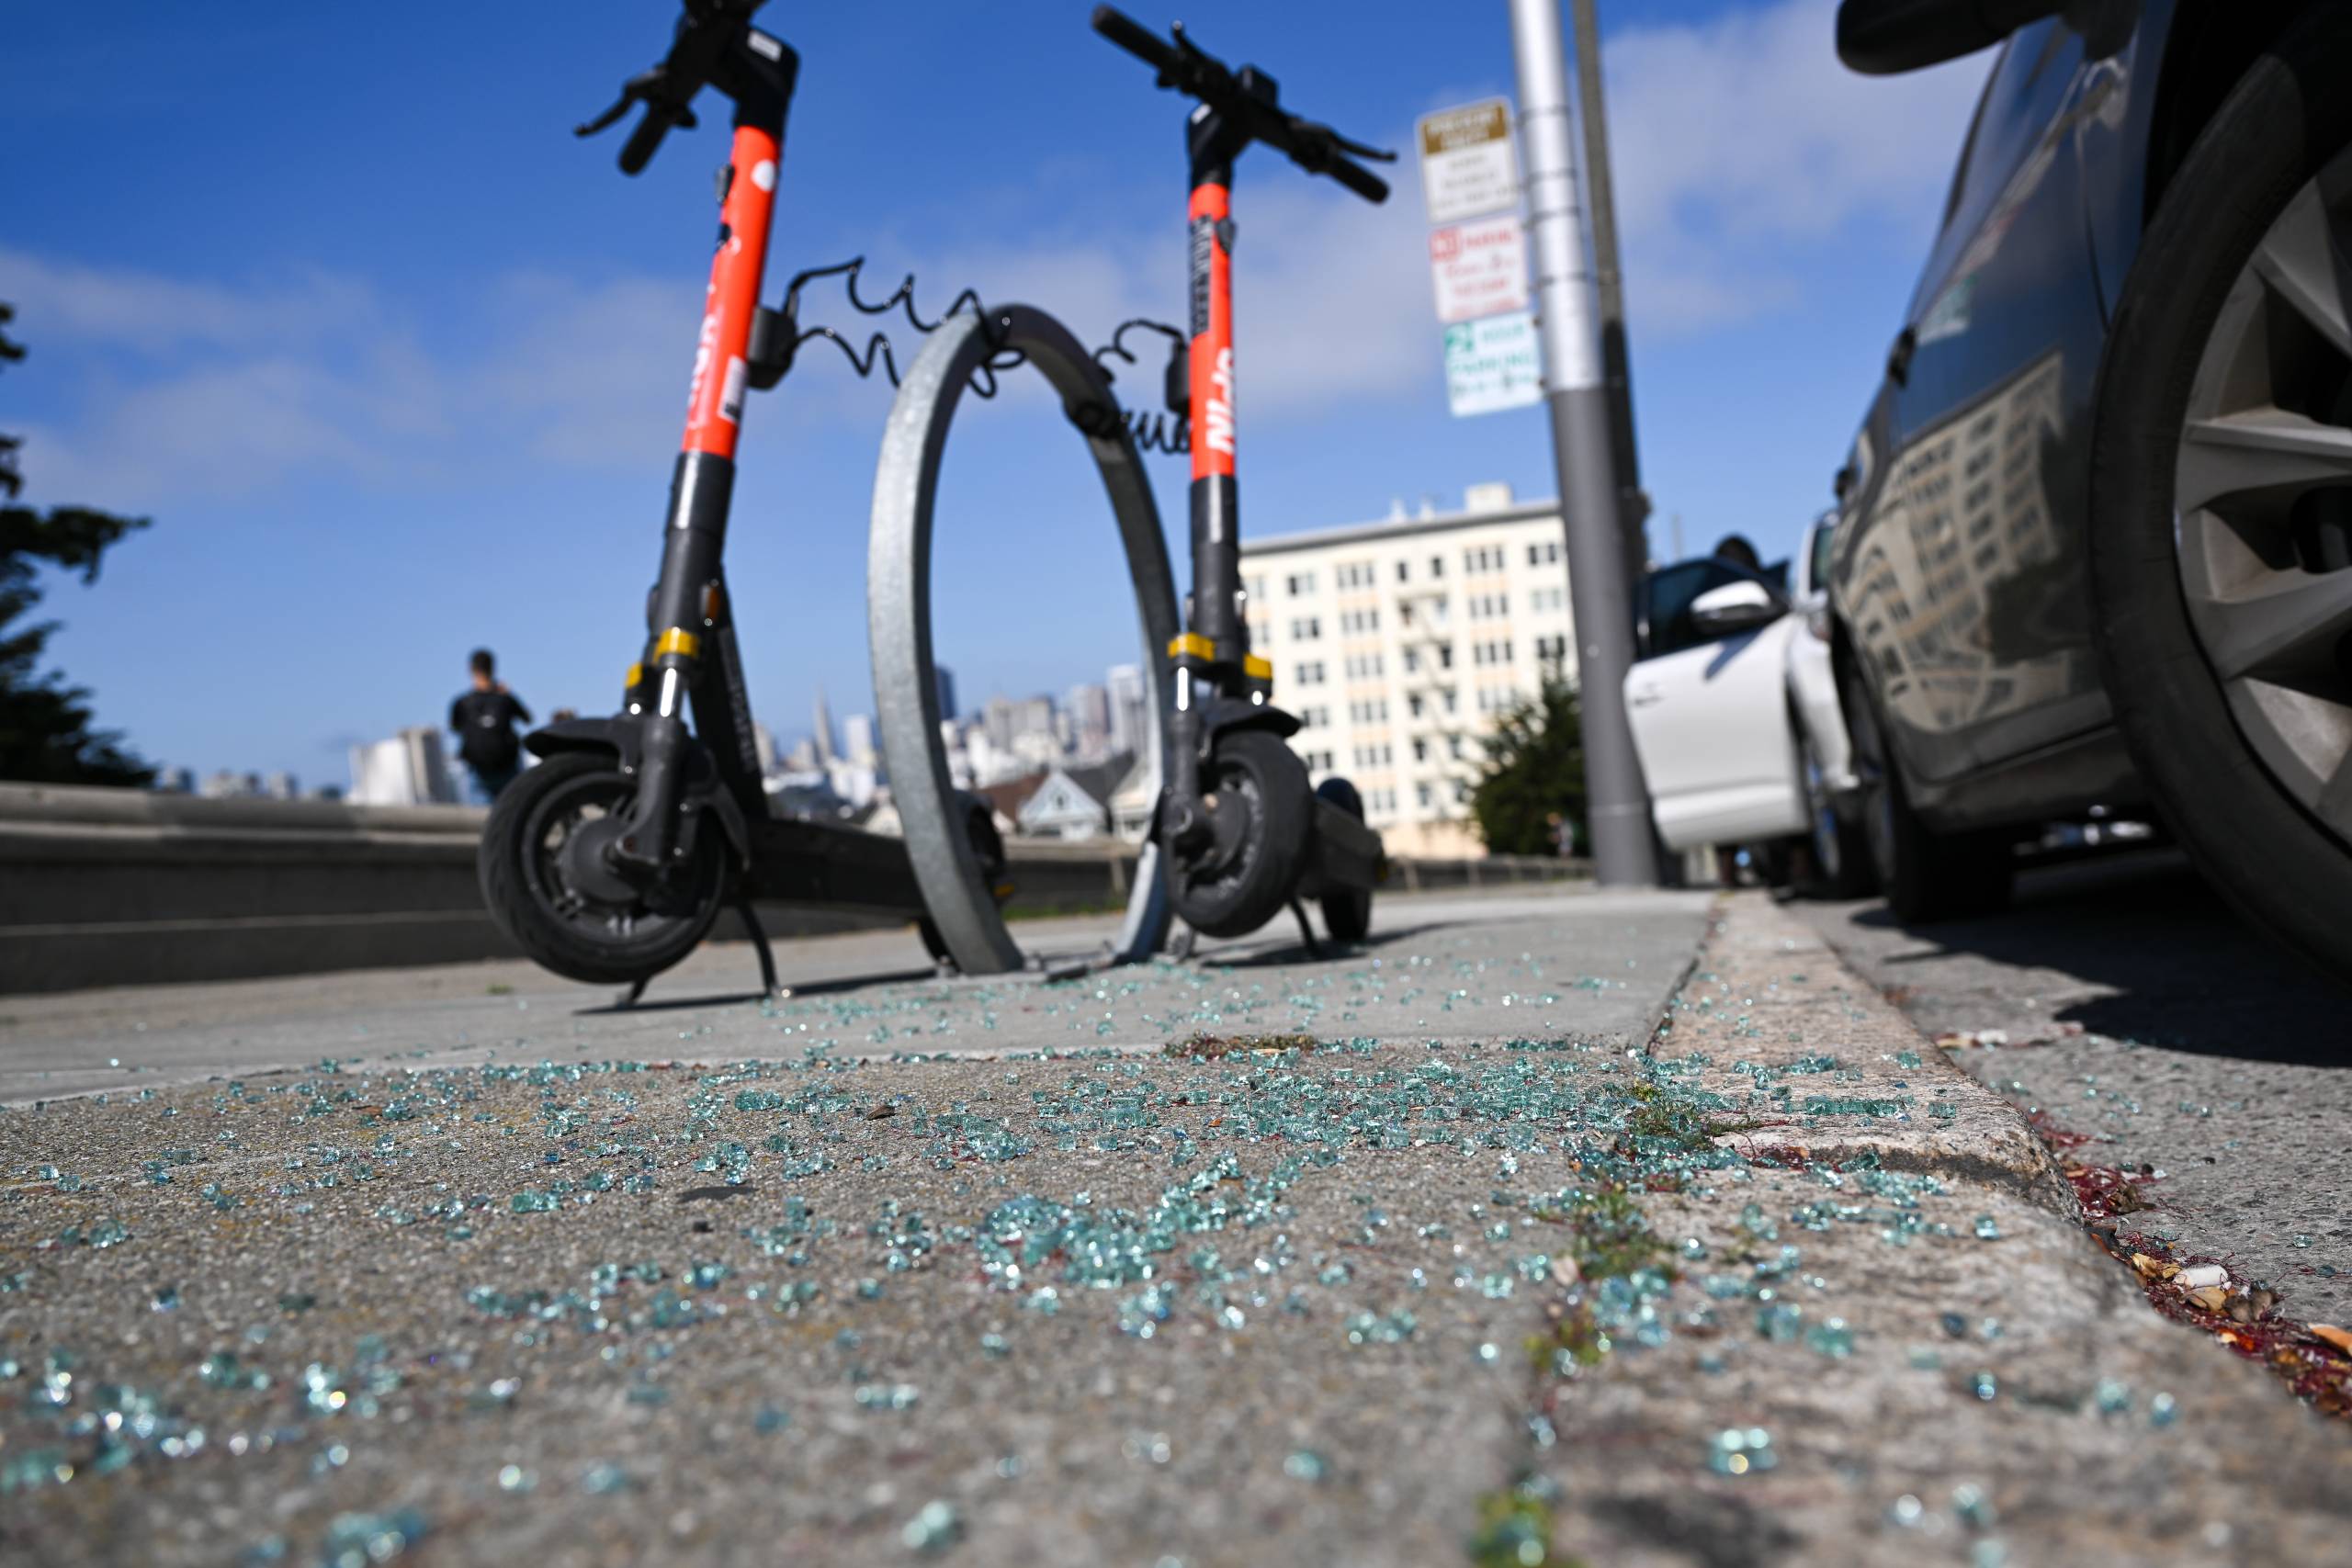 Shattered glass from a car window covers a street sidewalk. There are two electric scooters parked nearby.